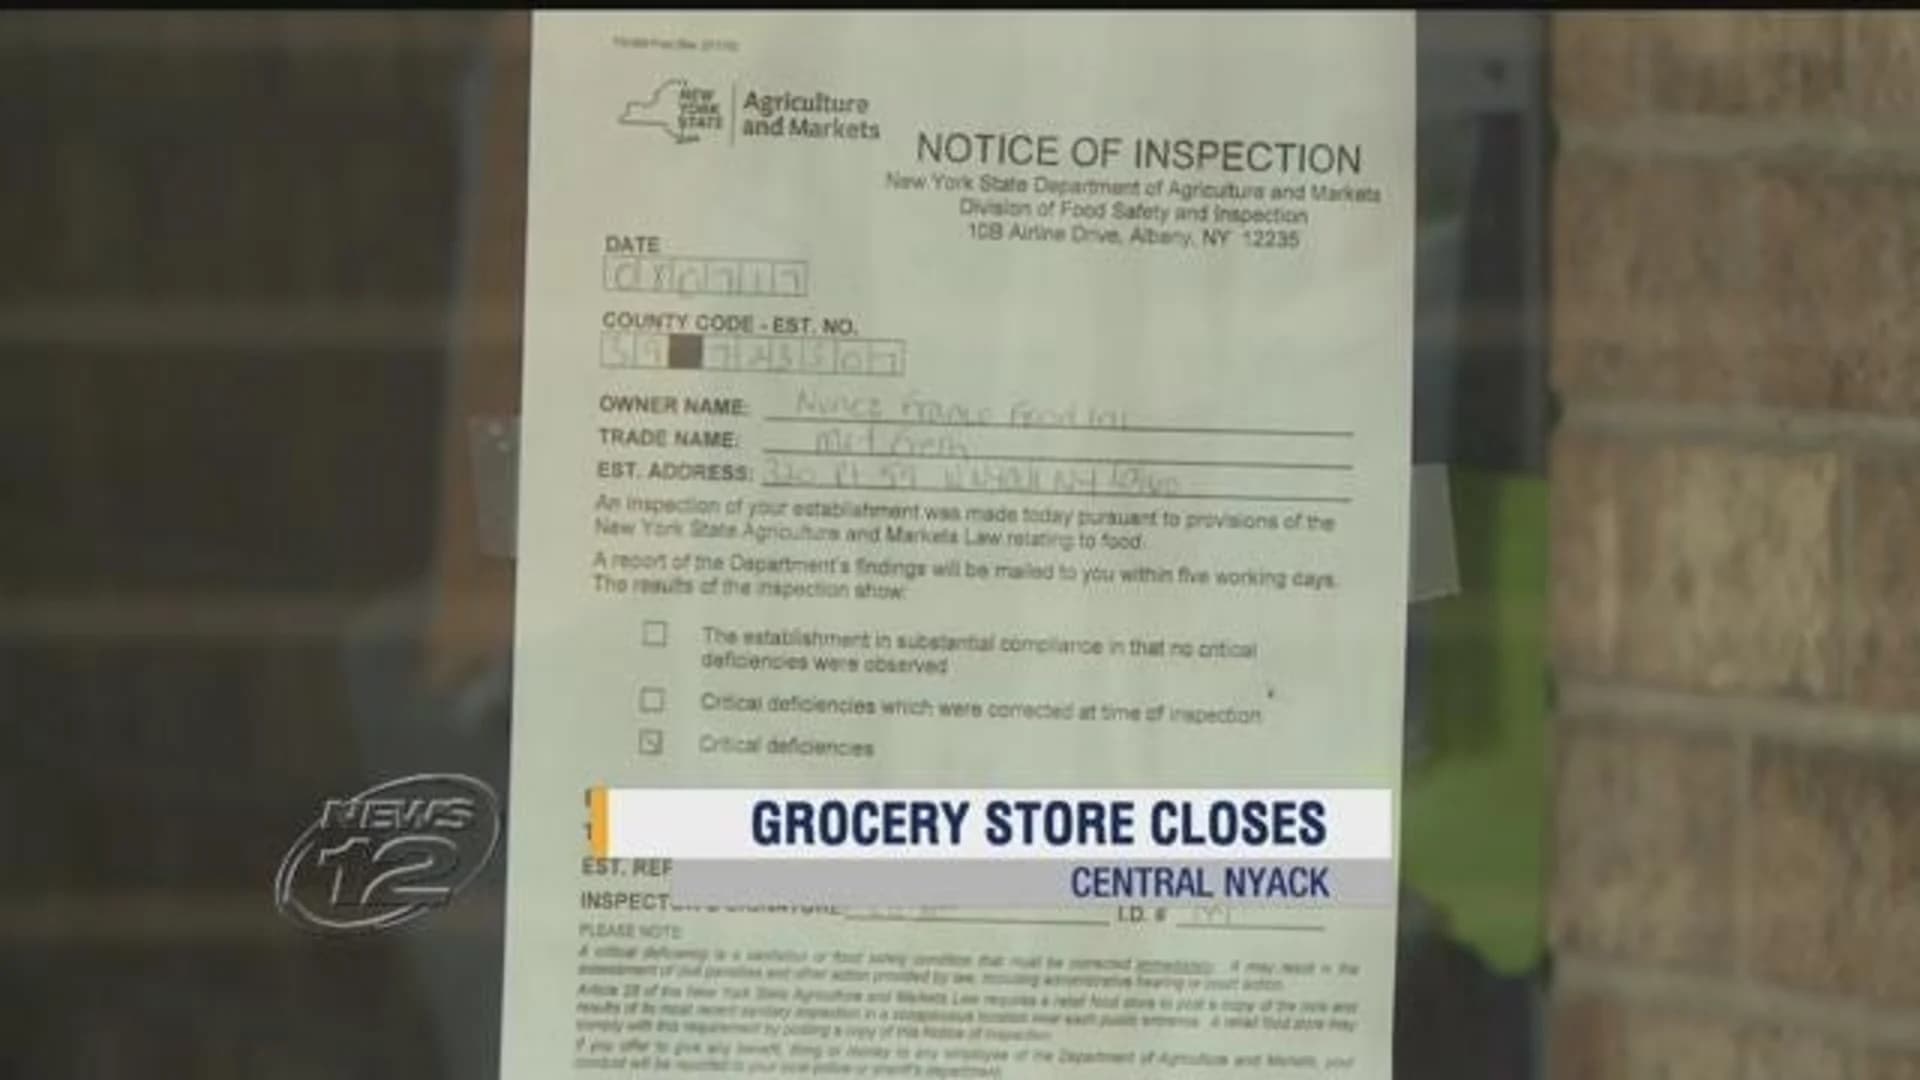 Central Nyack grocery store closes down